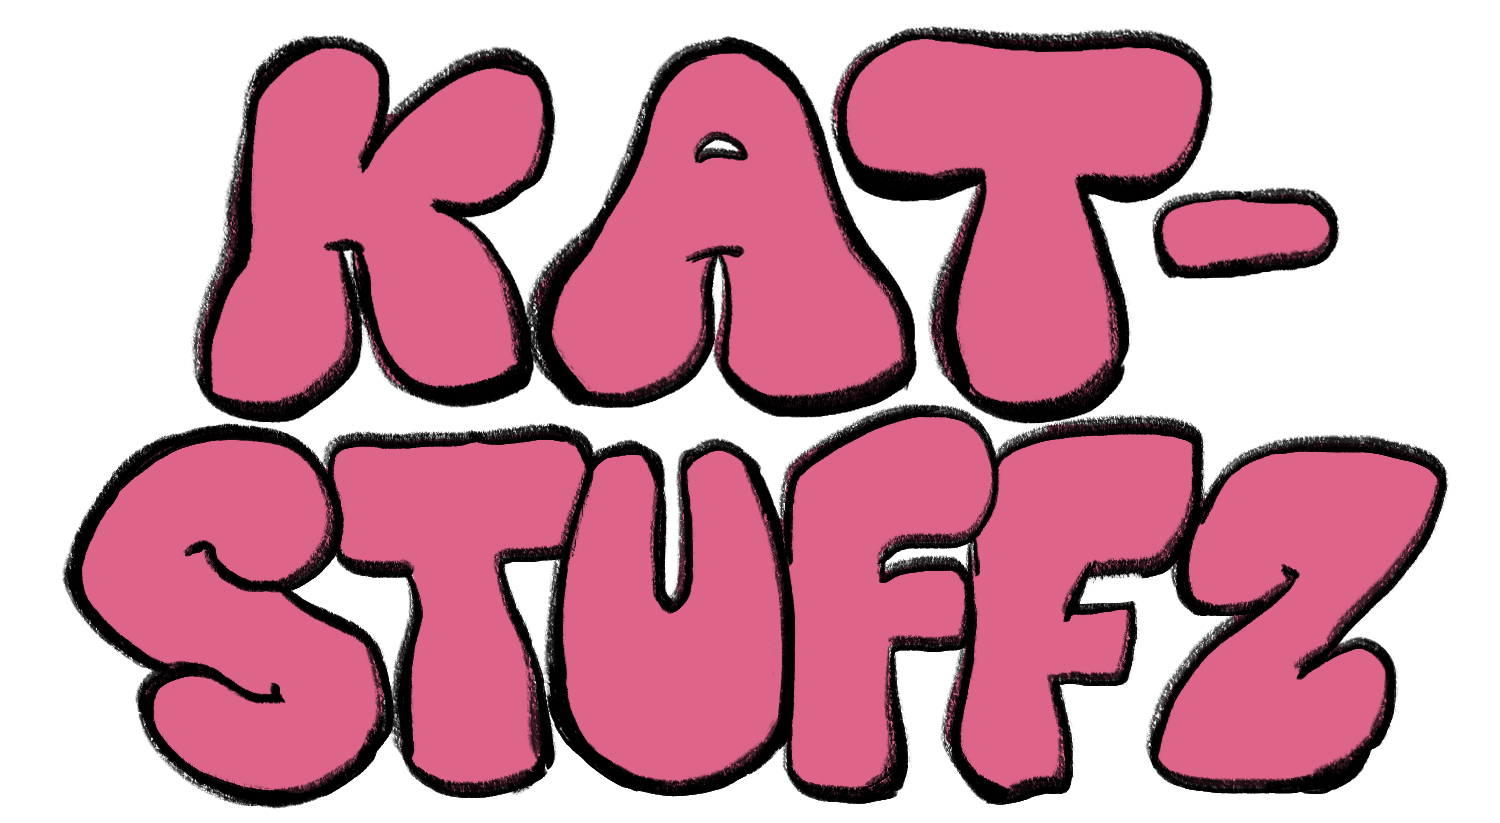 text that says, quote, kat-stuffz, end quote